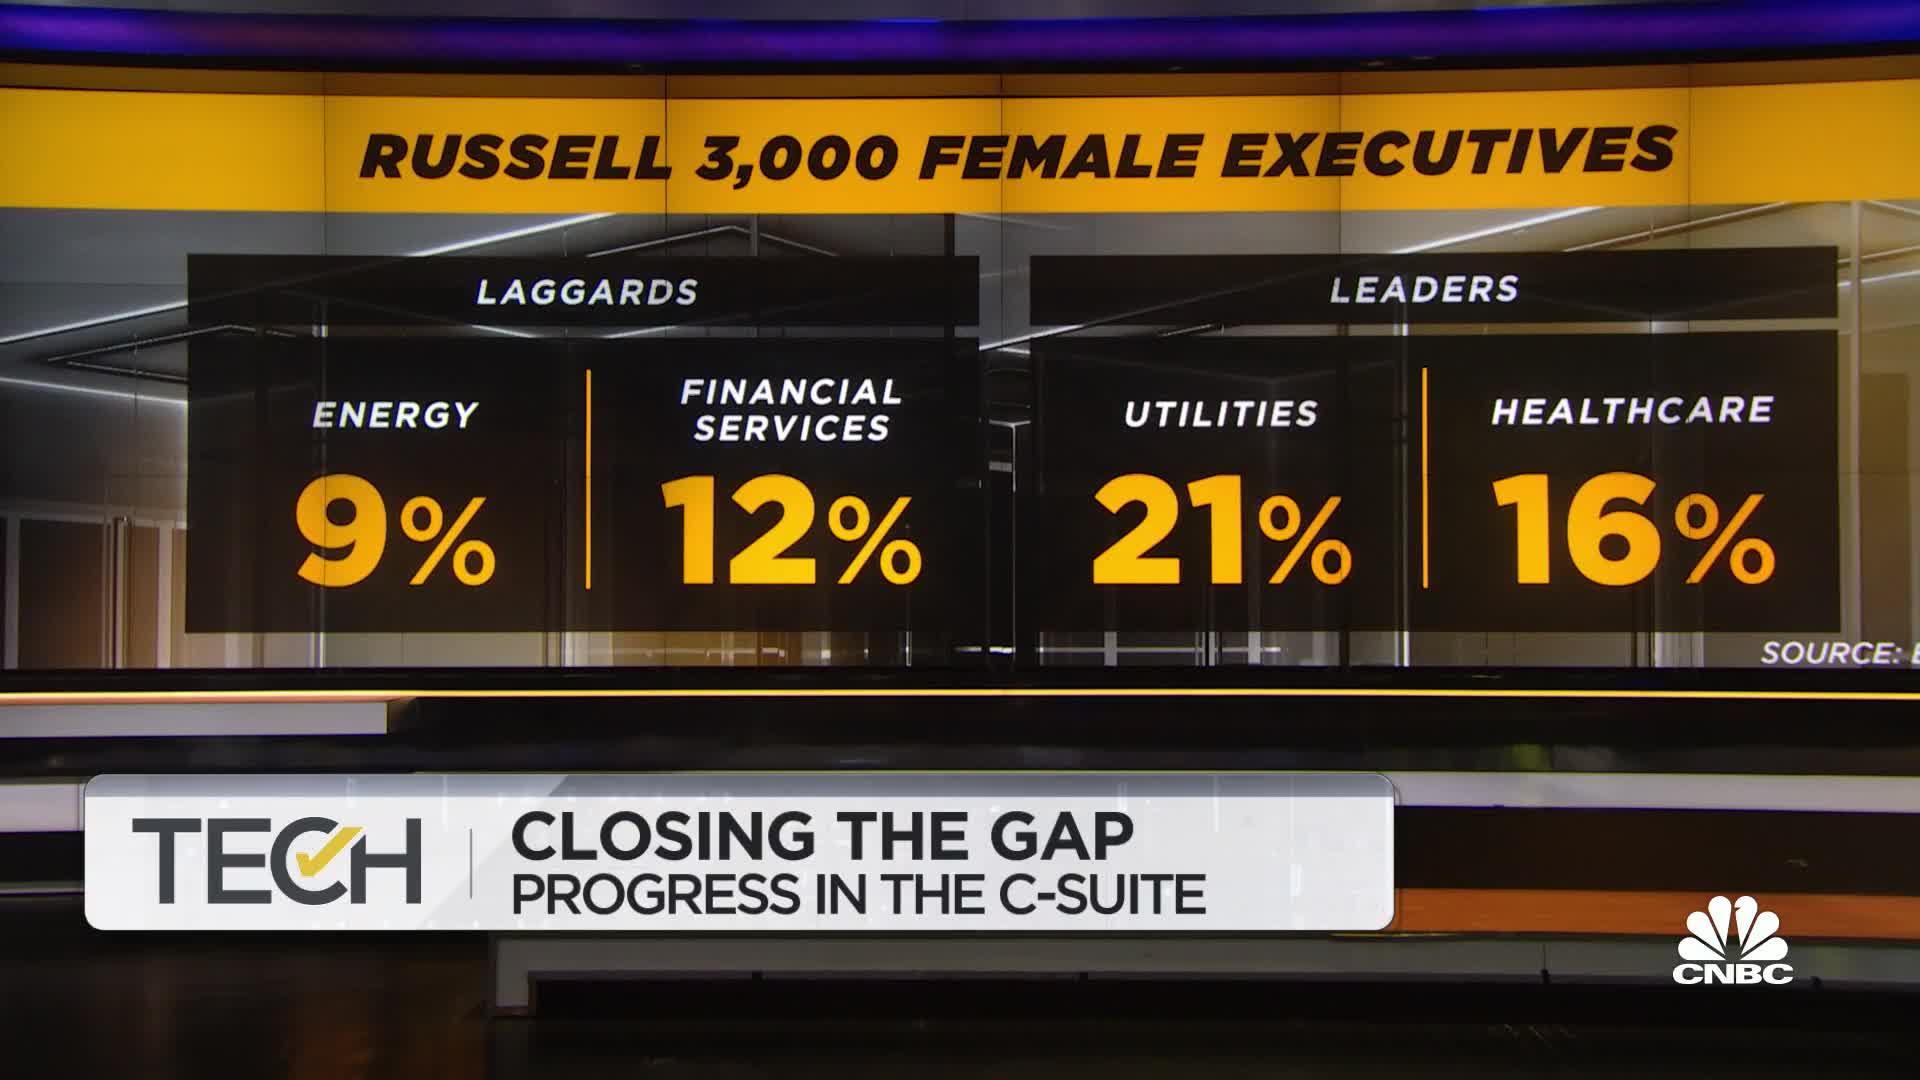 What industry has the most female CEOs?